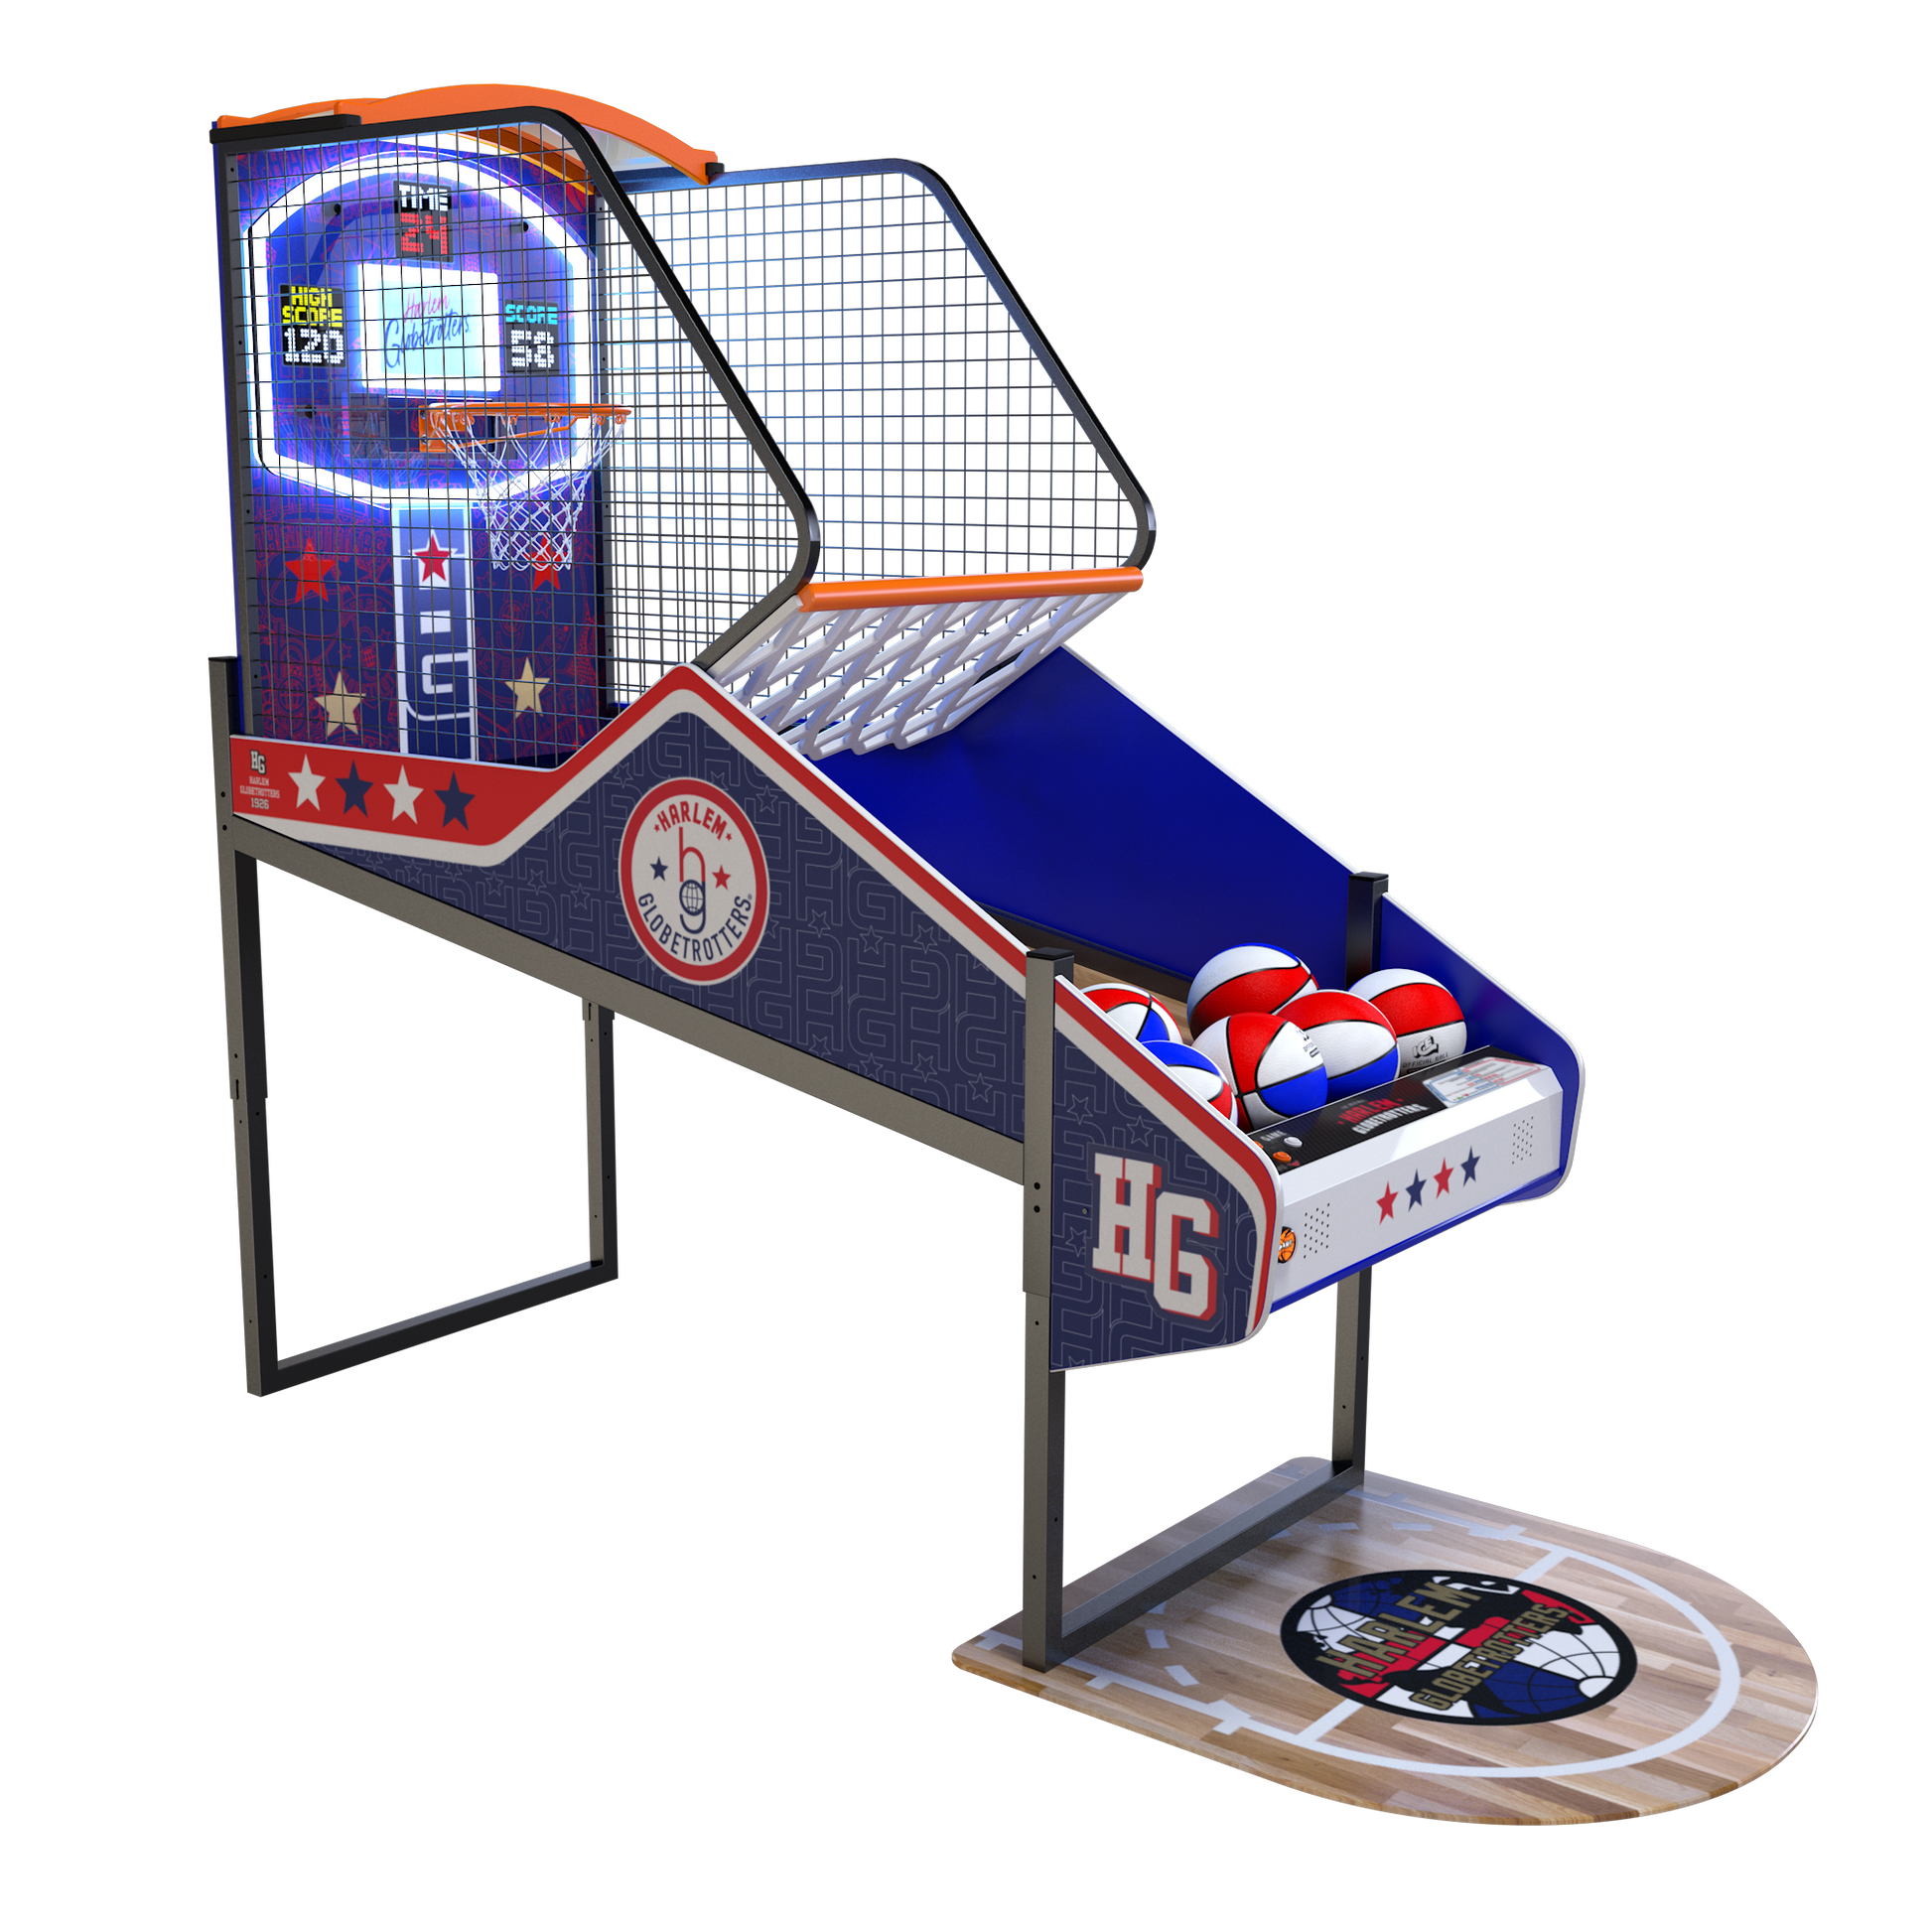 Harlem Globetrotters "Classic" Game time Pro with Floor Mat  Innovative Concepts in Entertainment, Inc.   